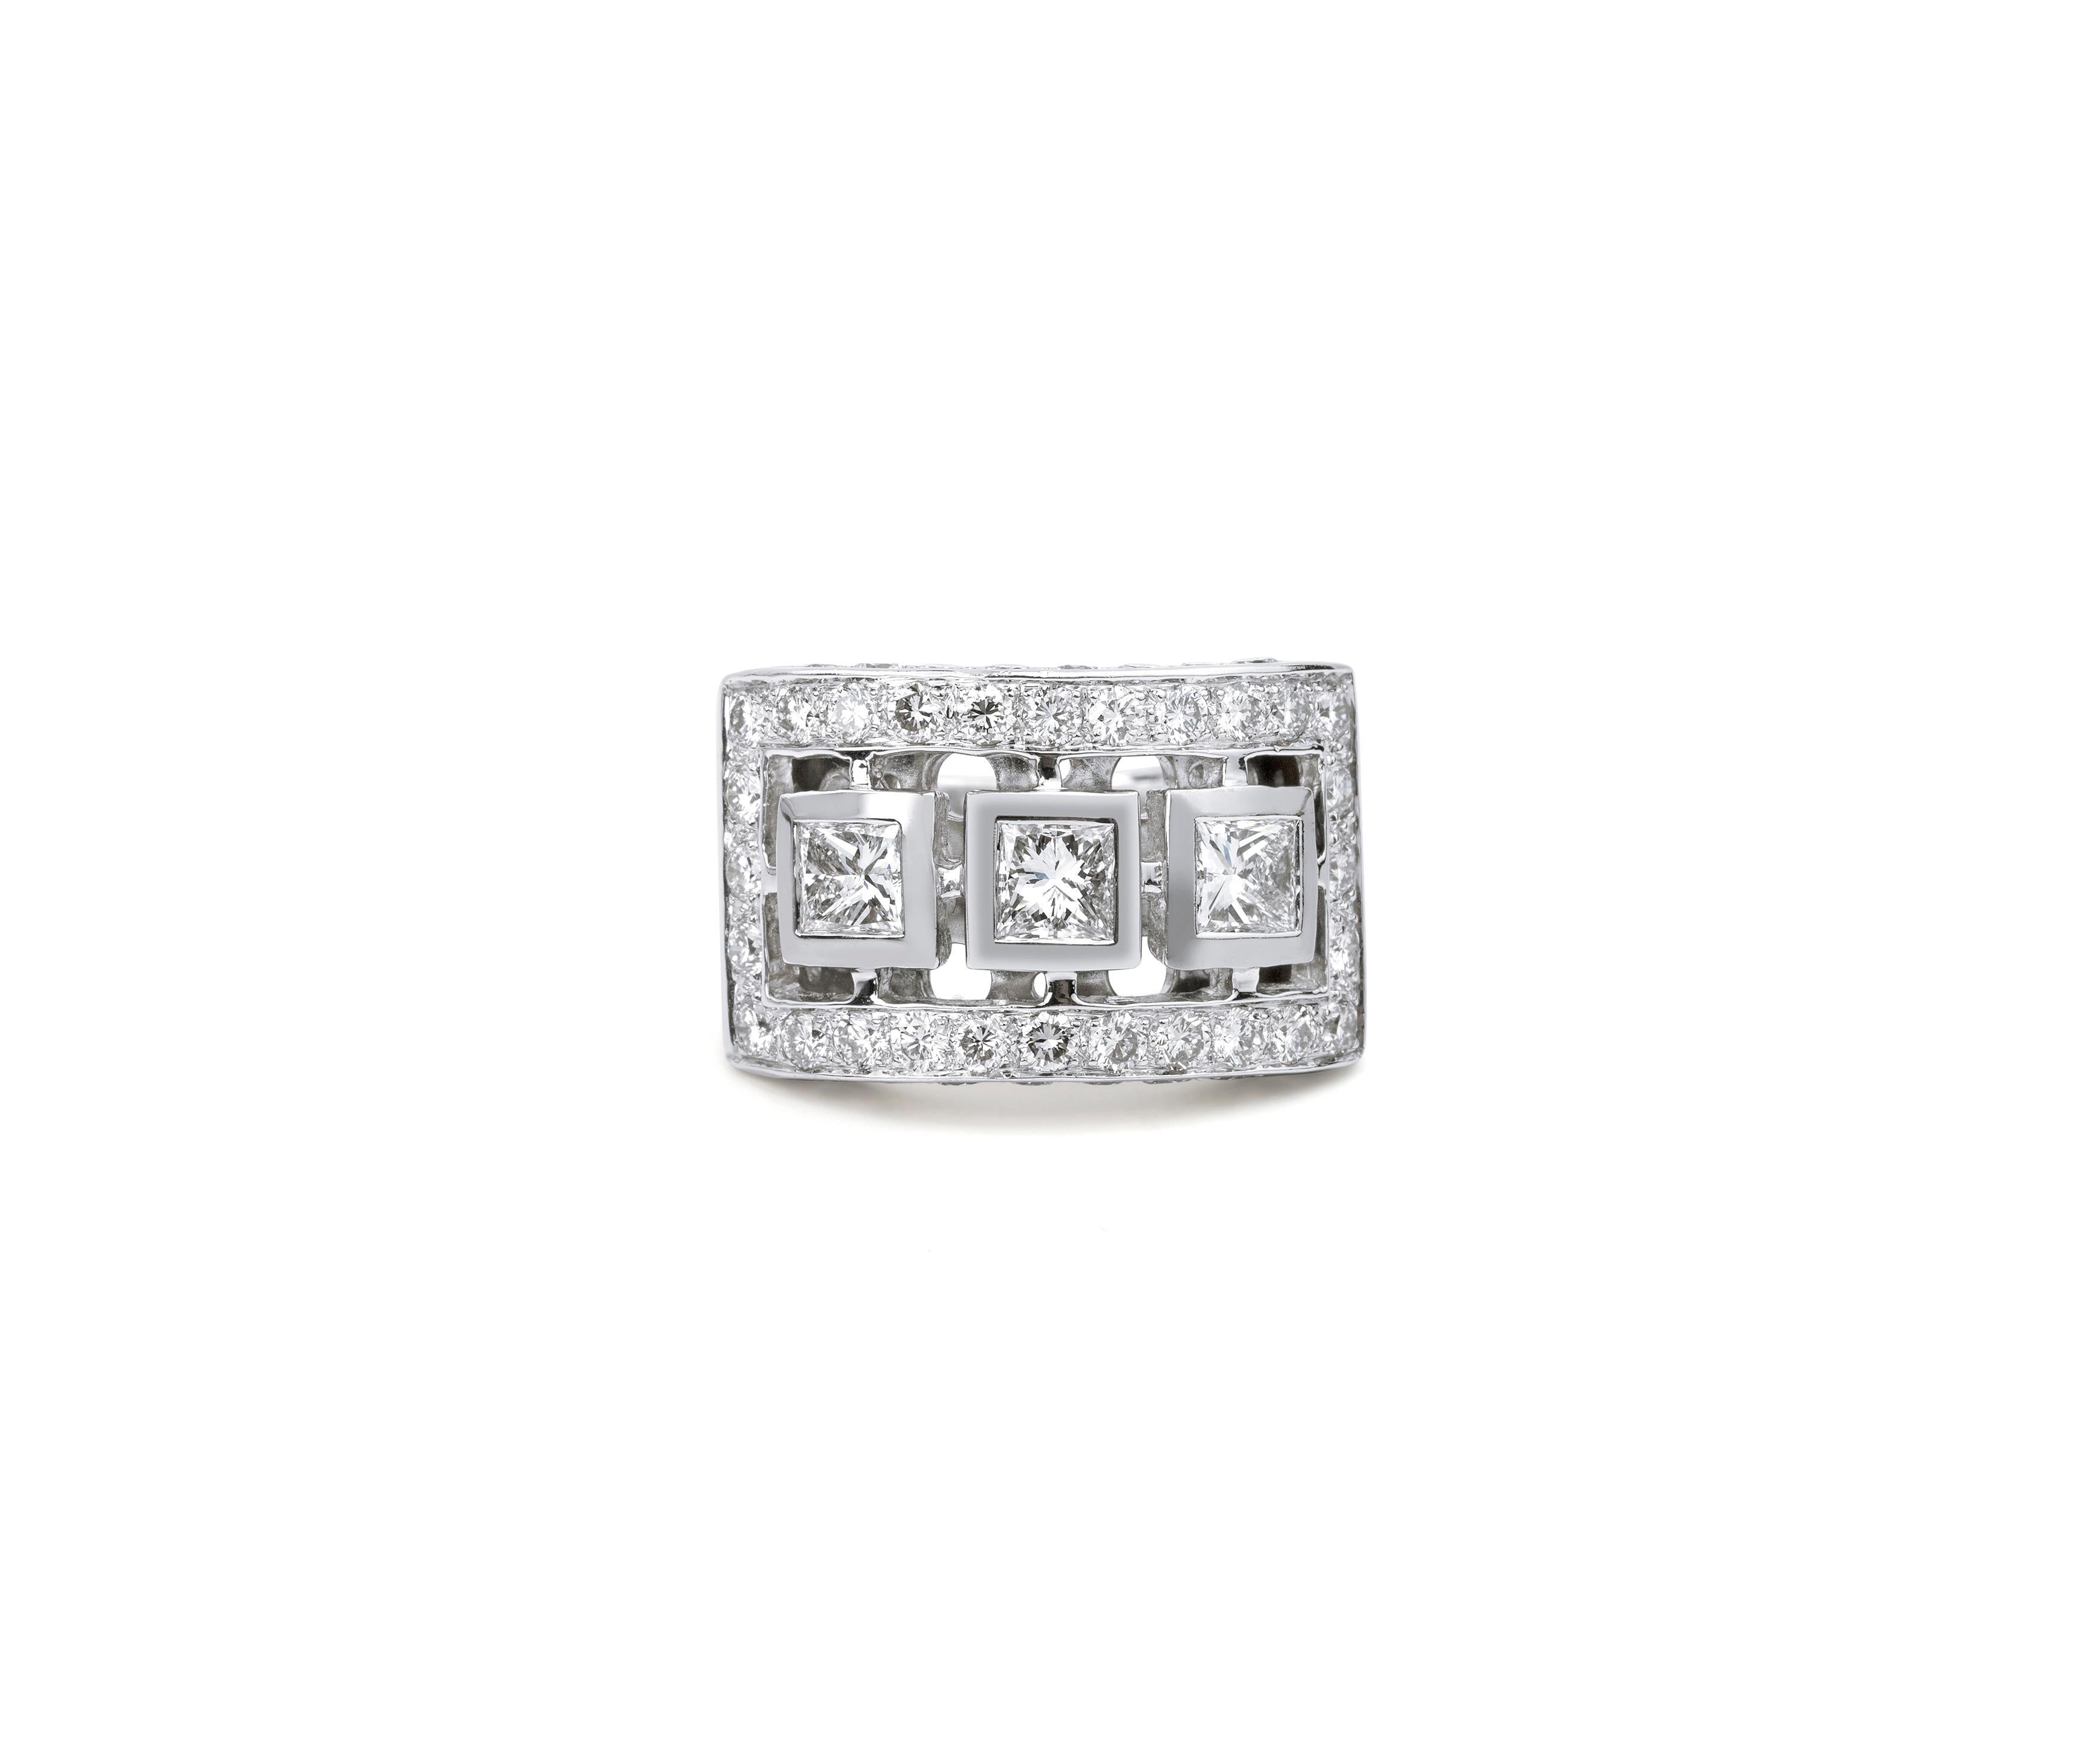 Princess Cut Diamond Statement Cocktail Ring 3ct Diamonds, Anniversary Gift 

Available in 18k white gold.

Same design can be made also with other custom gemstones per request.

Product details:

- Solid gold

- Diamonds - approx. 3.11 carat G VS